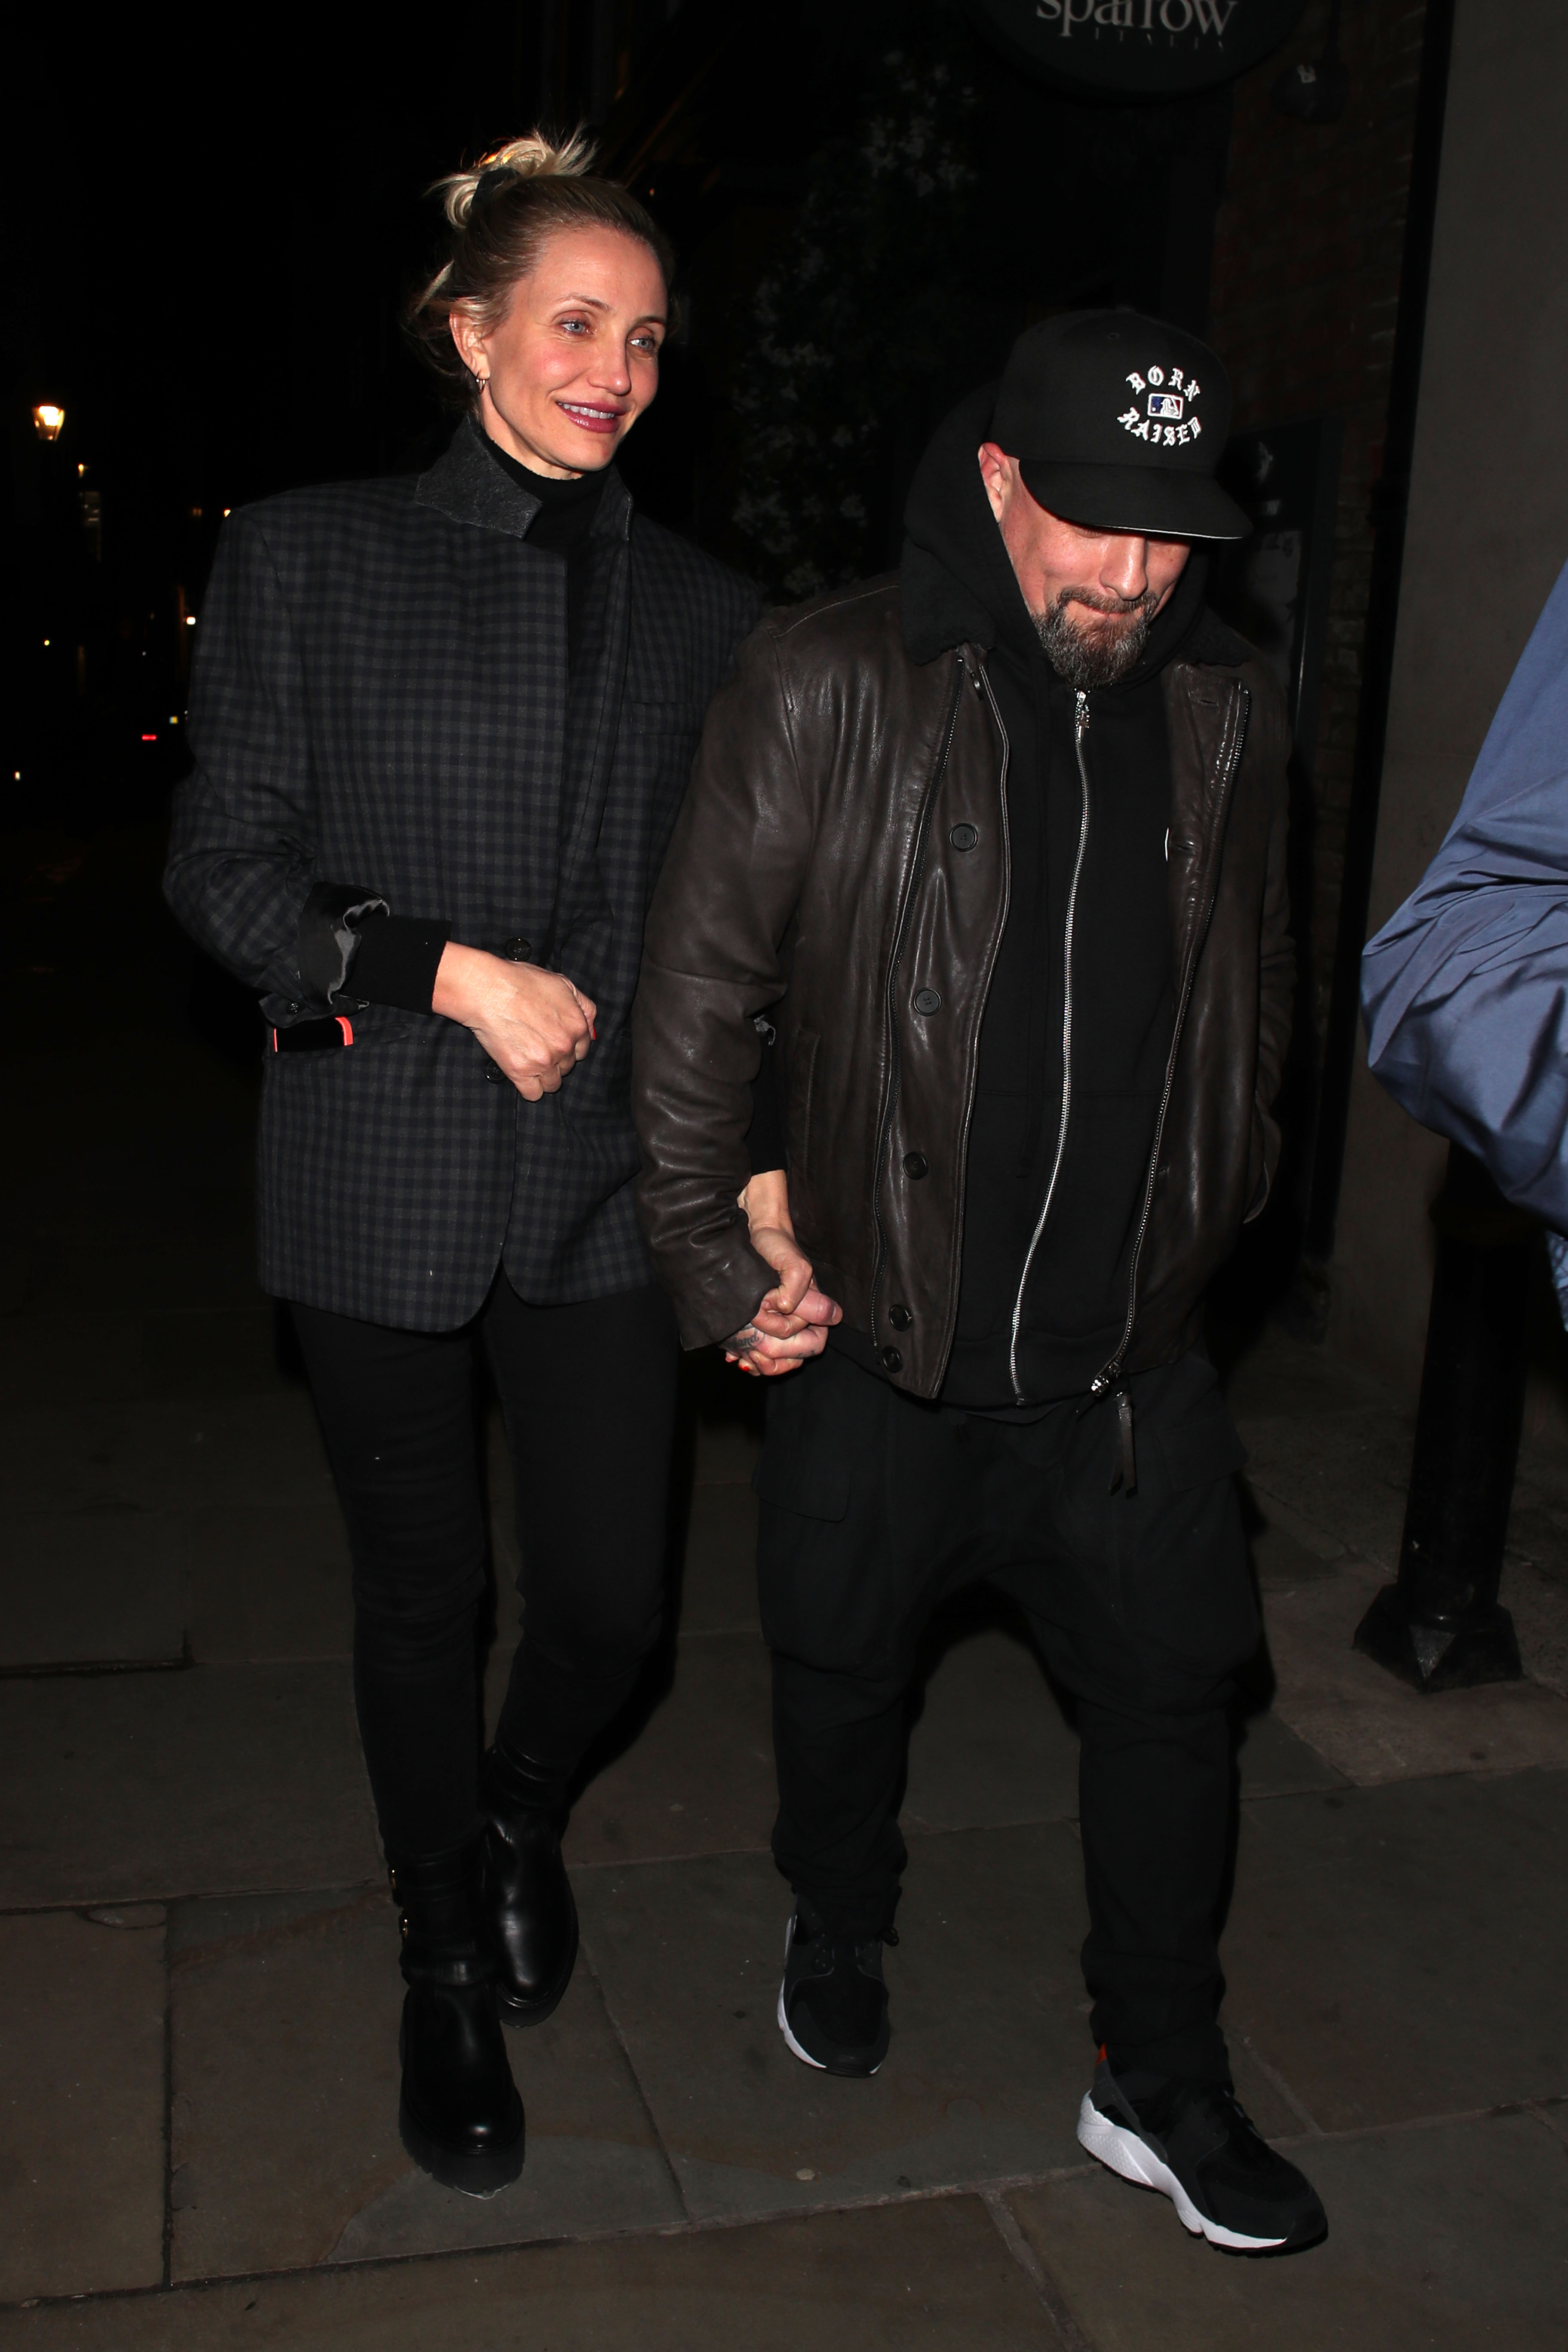 Cameron Diaz and Benji Madden on December 3, 2022, in London, England. | Source: Getty Images